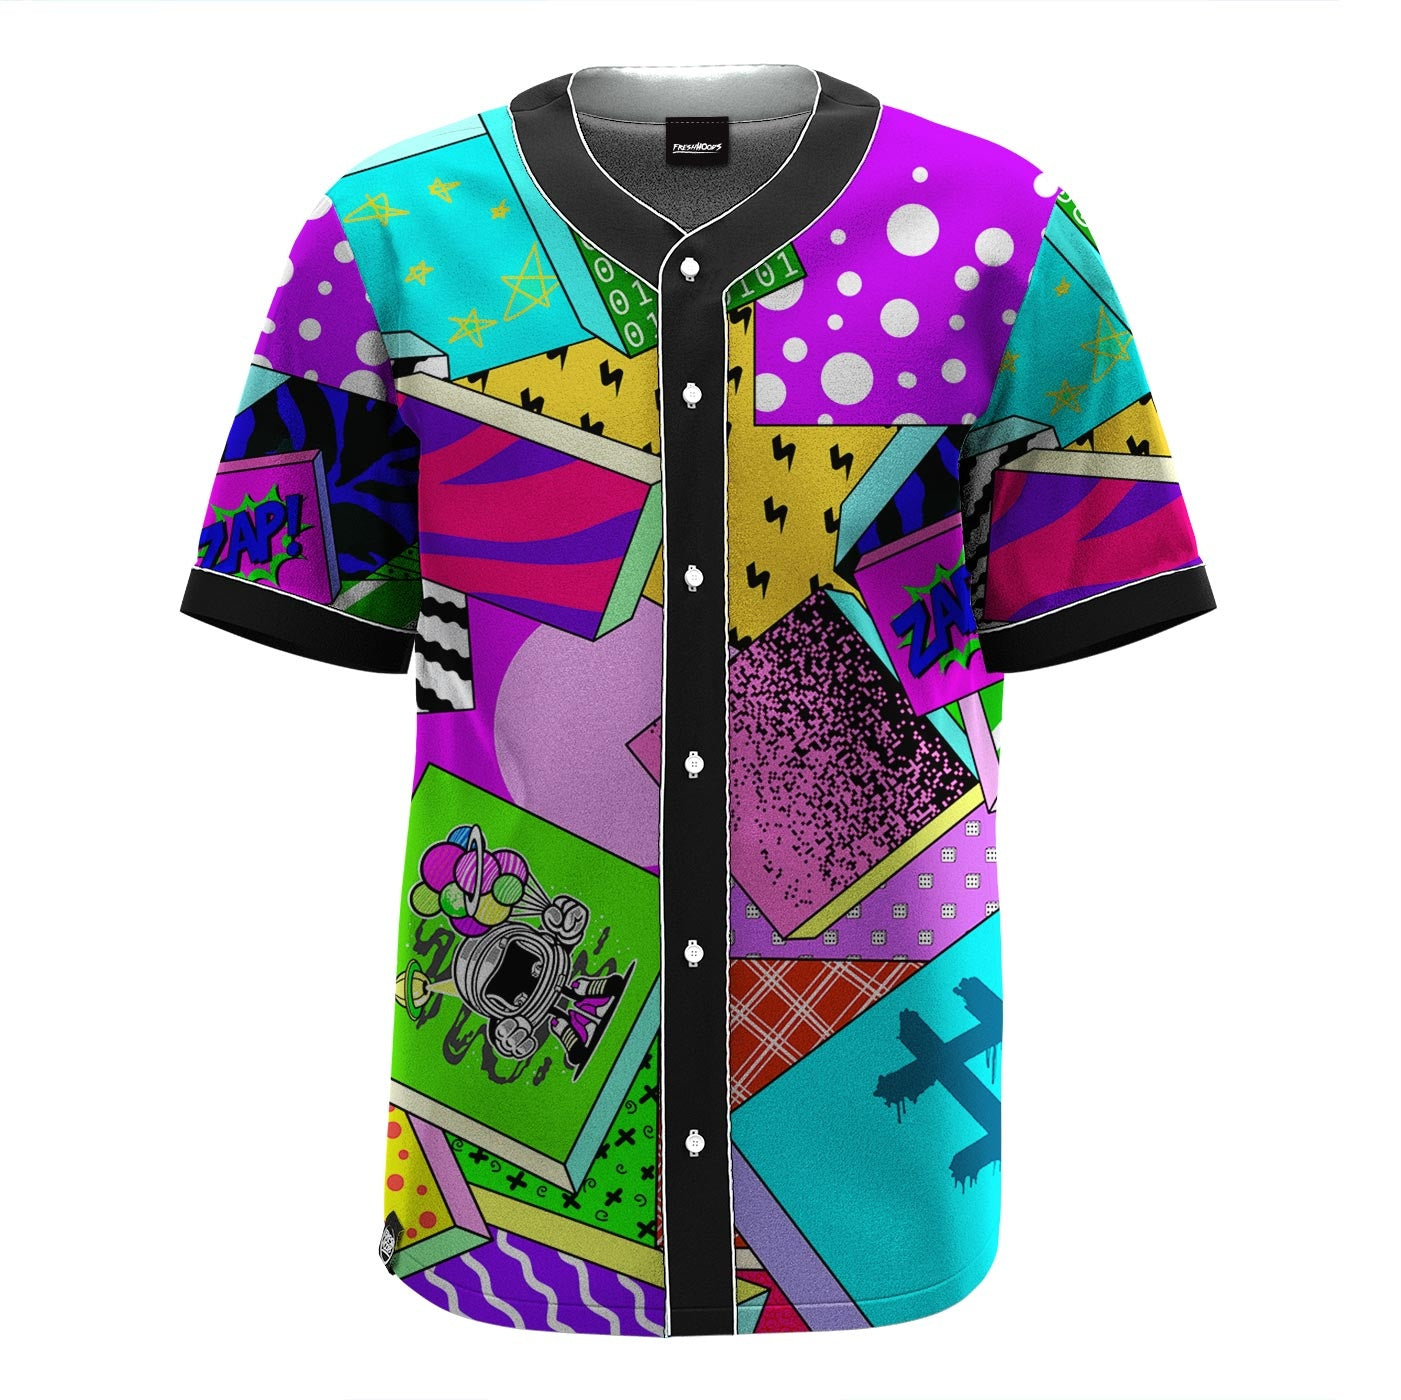 Zap Attack Jersey